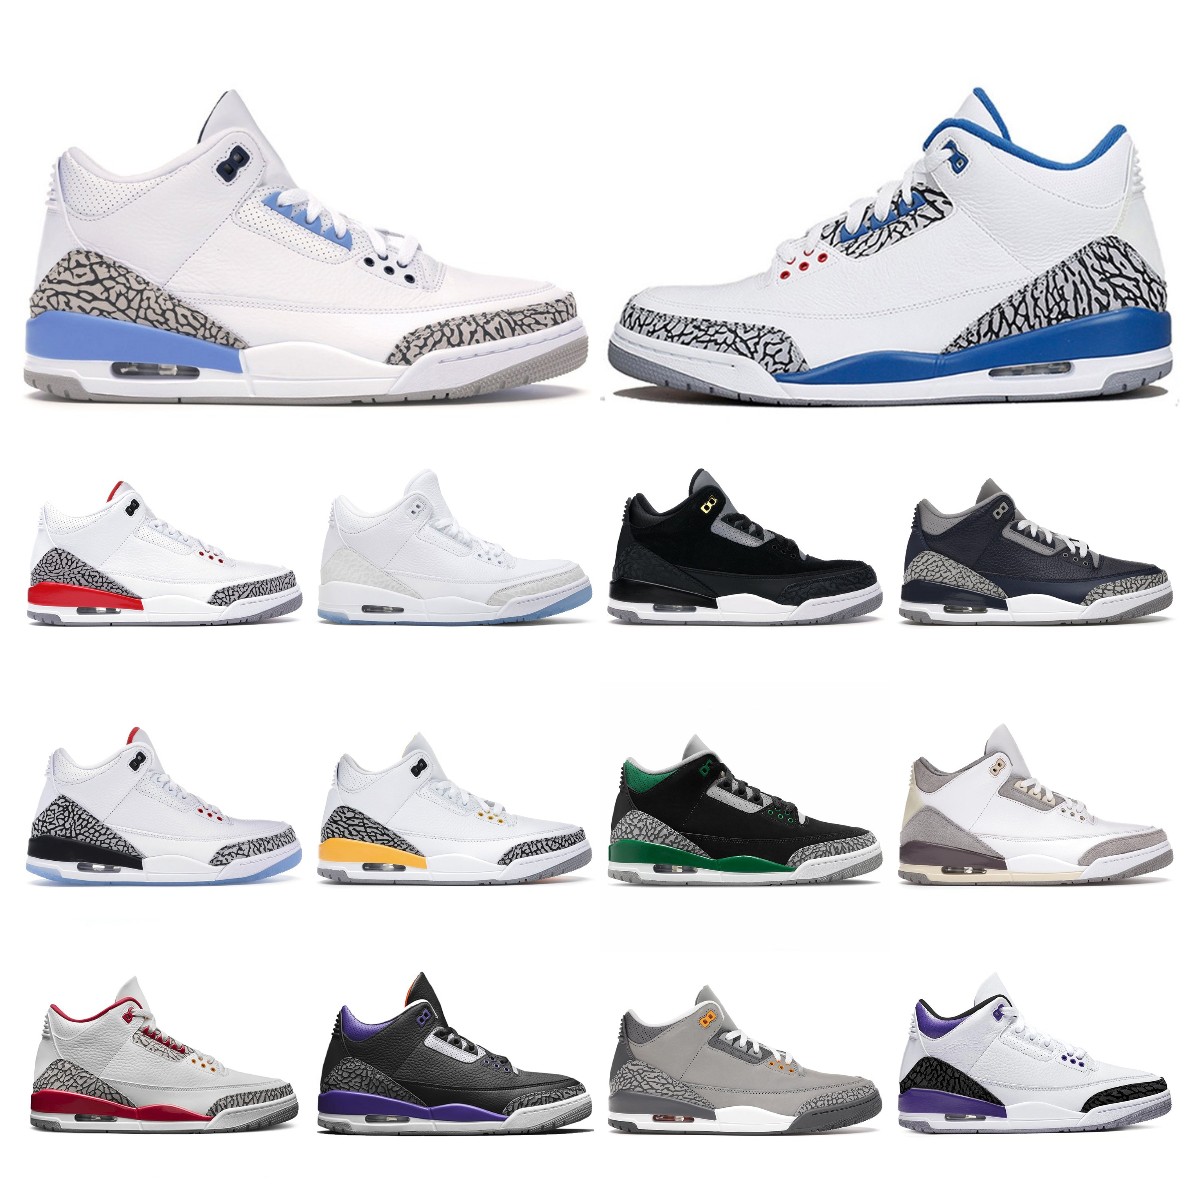 

men basketball shoes 3s jumpman 3 Cardinal Red Pine Green Racer Blue Cool Grey Hall of Fame Court Purple Laser Orange Dark Iris mens trainers outdoor sports sneakers, Bubble column